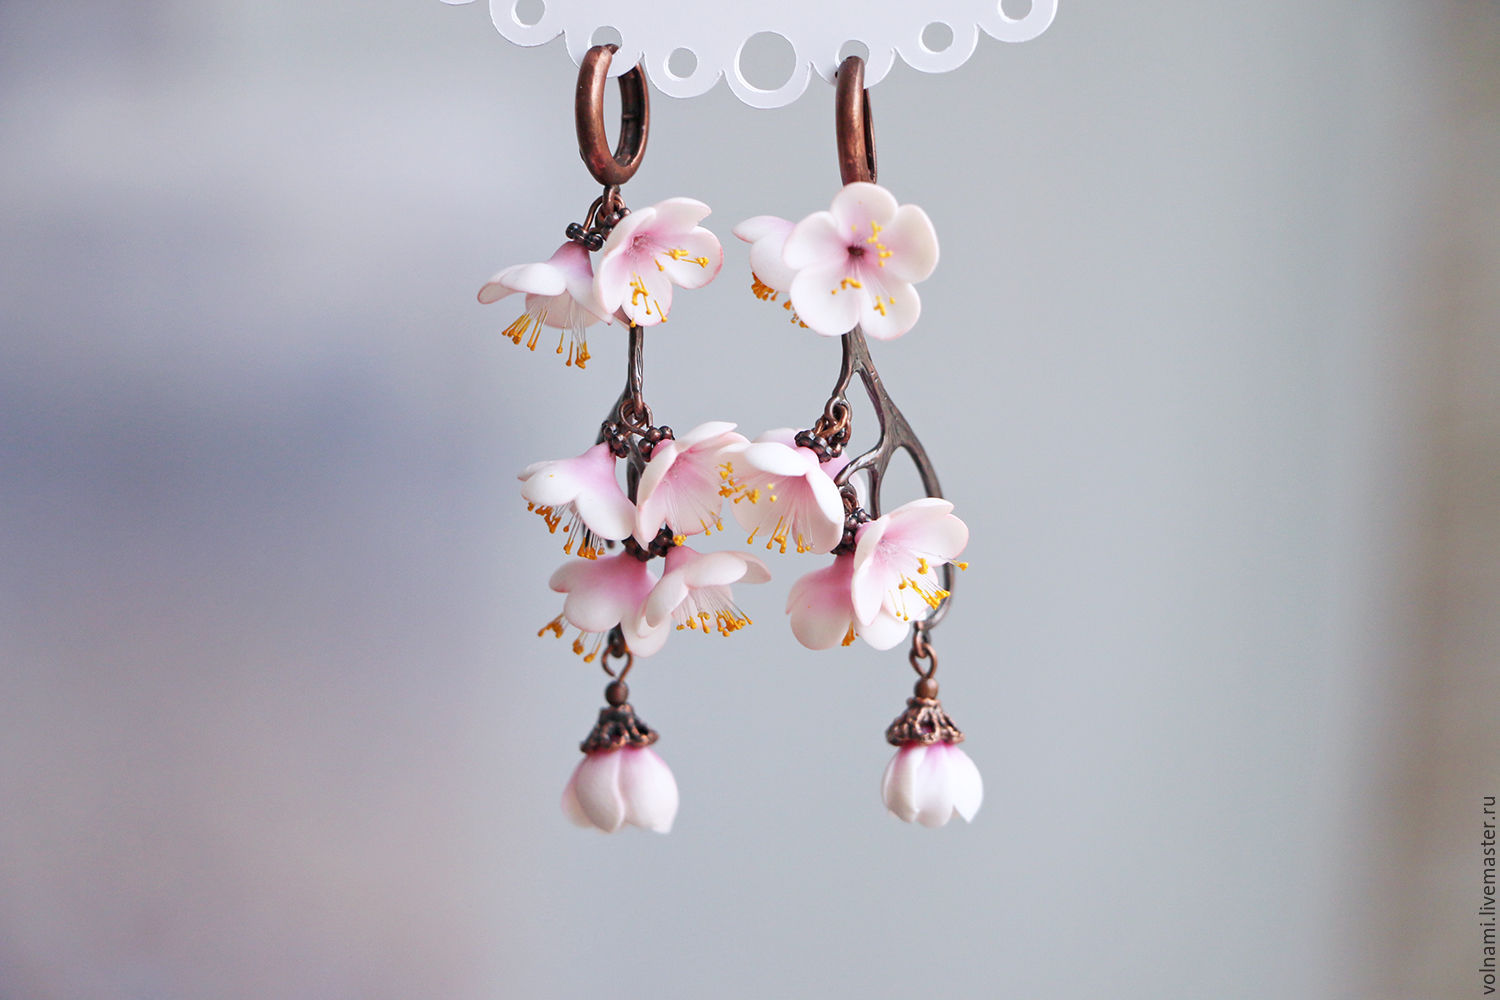 Polymer clay cherry blossoms jewelry - Polymer clay cherry blossoms earrings Polymer clay long flower earrings